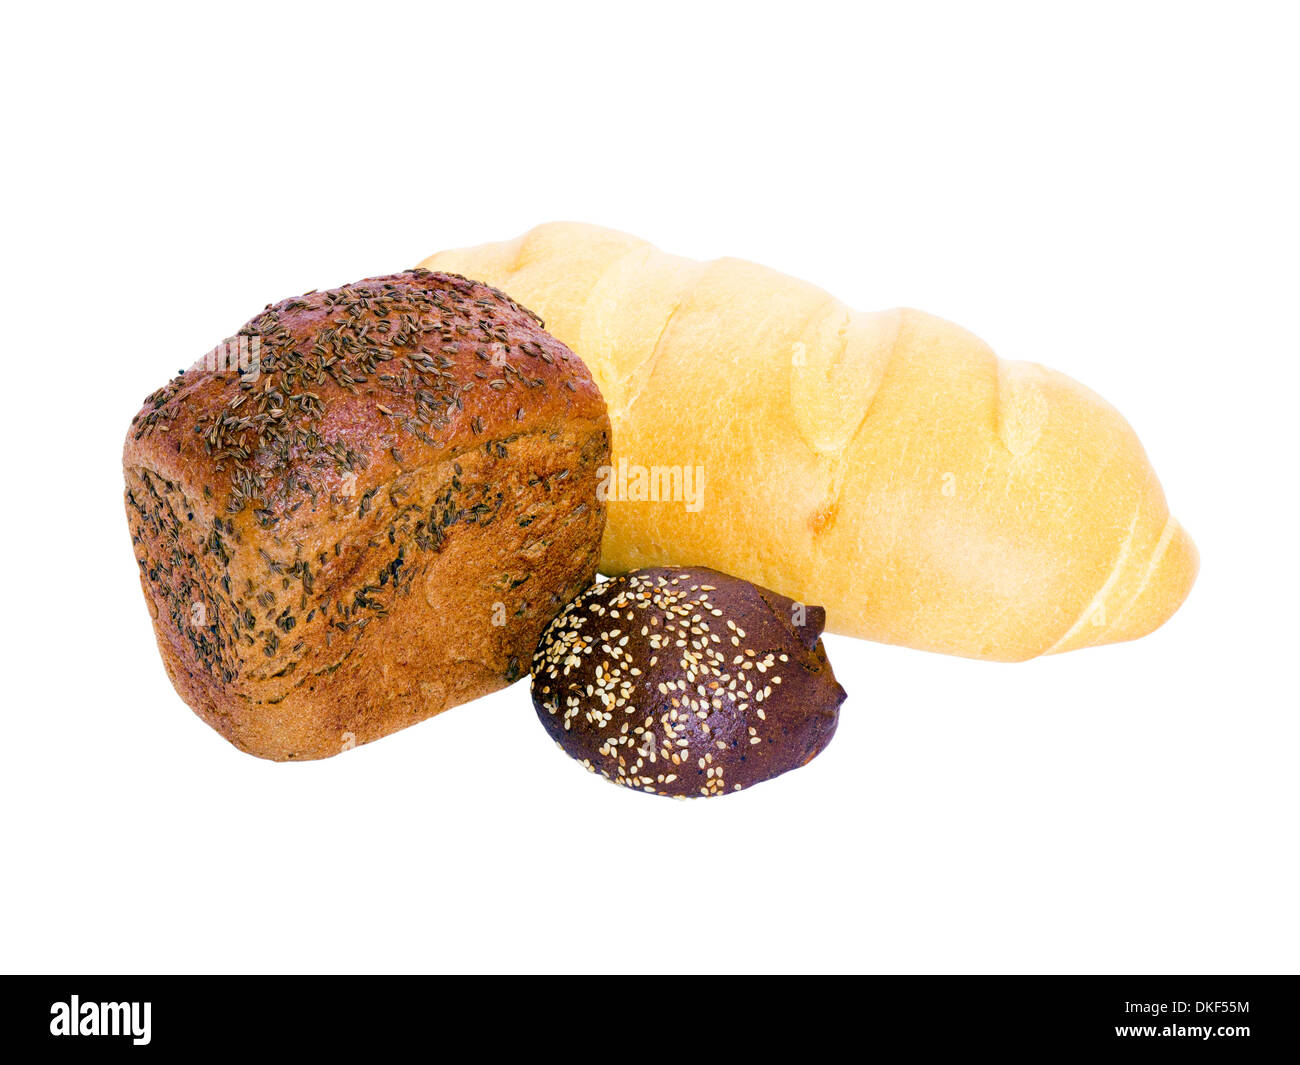 loaf of bread, a loaf and bun on a white background Stock Photo